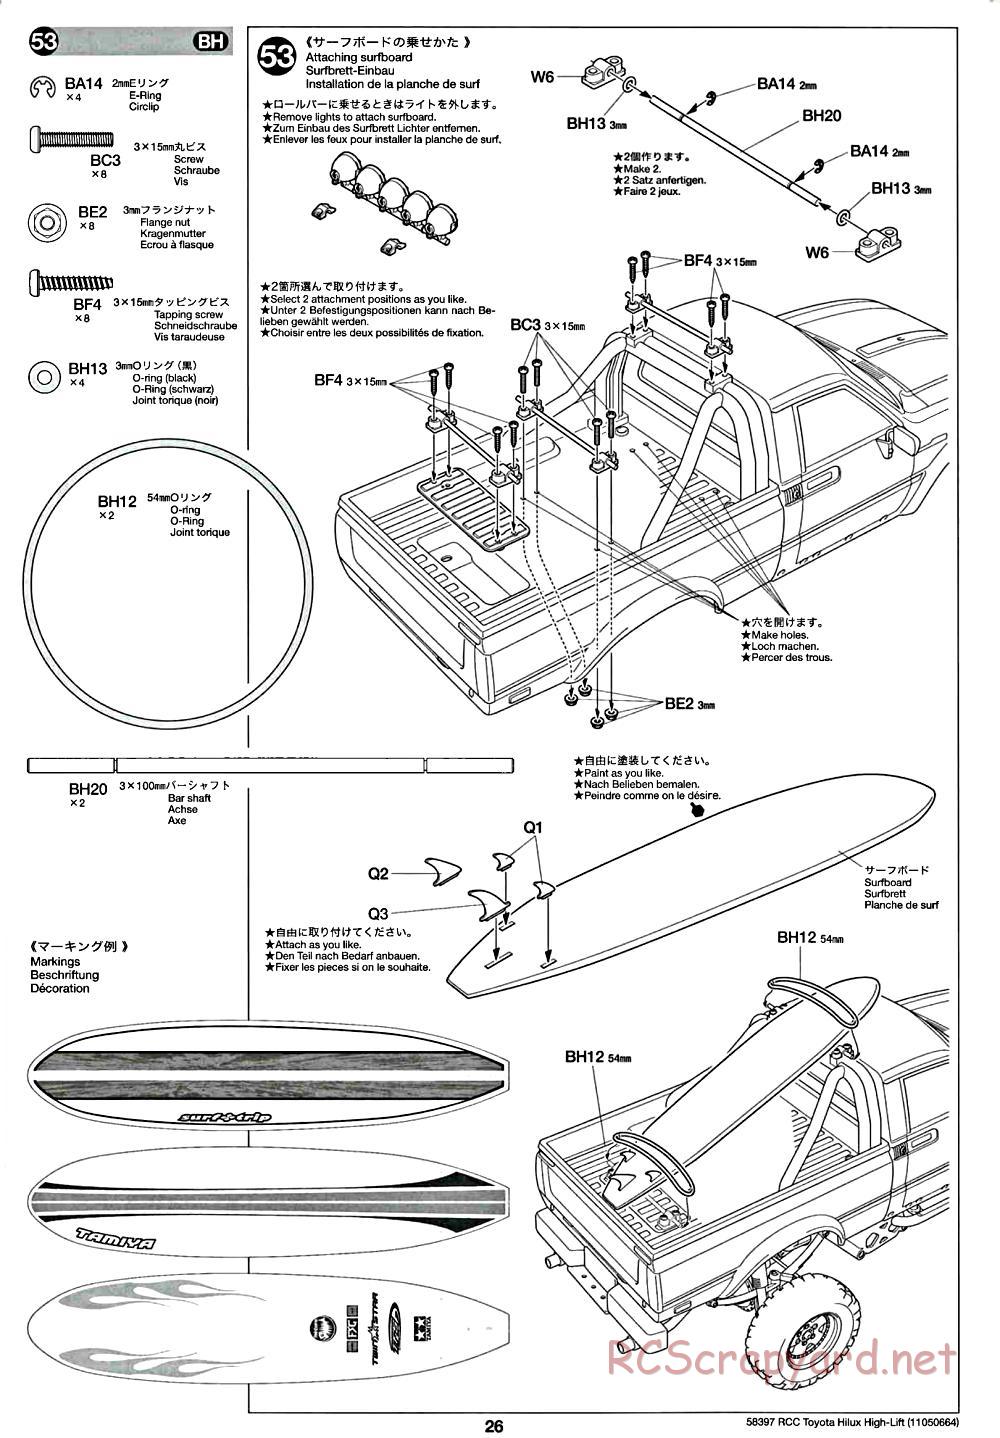 Tamiya - Toyota Hilux High-Lift Chassis - Manual - Page 26